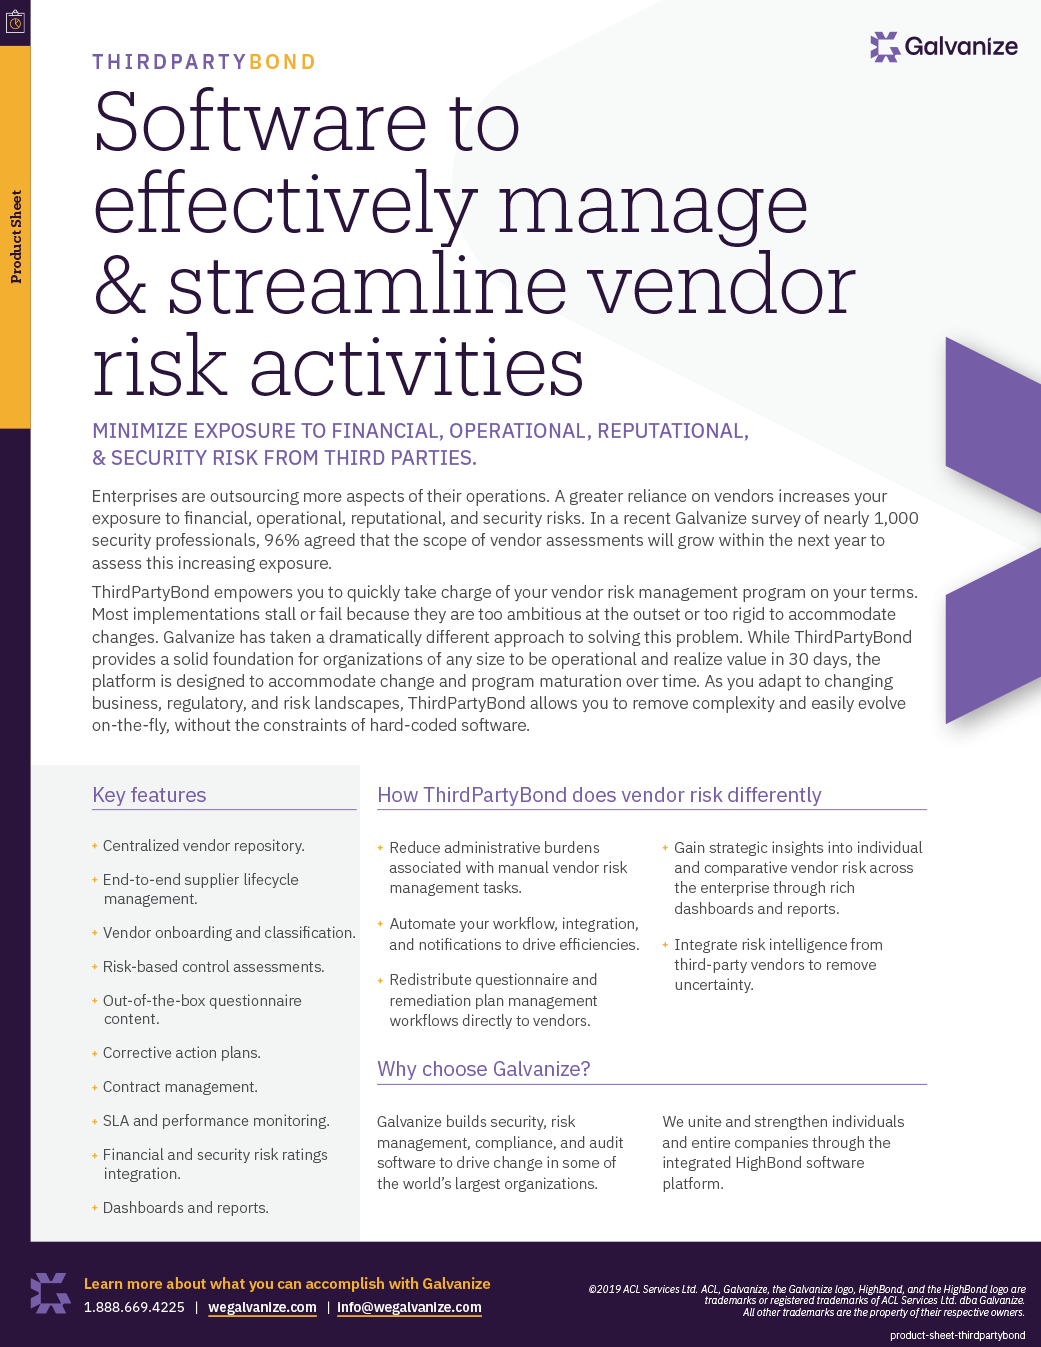 Software to effectively manage & streamline vendor risk activities